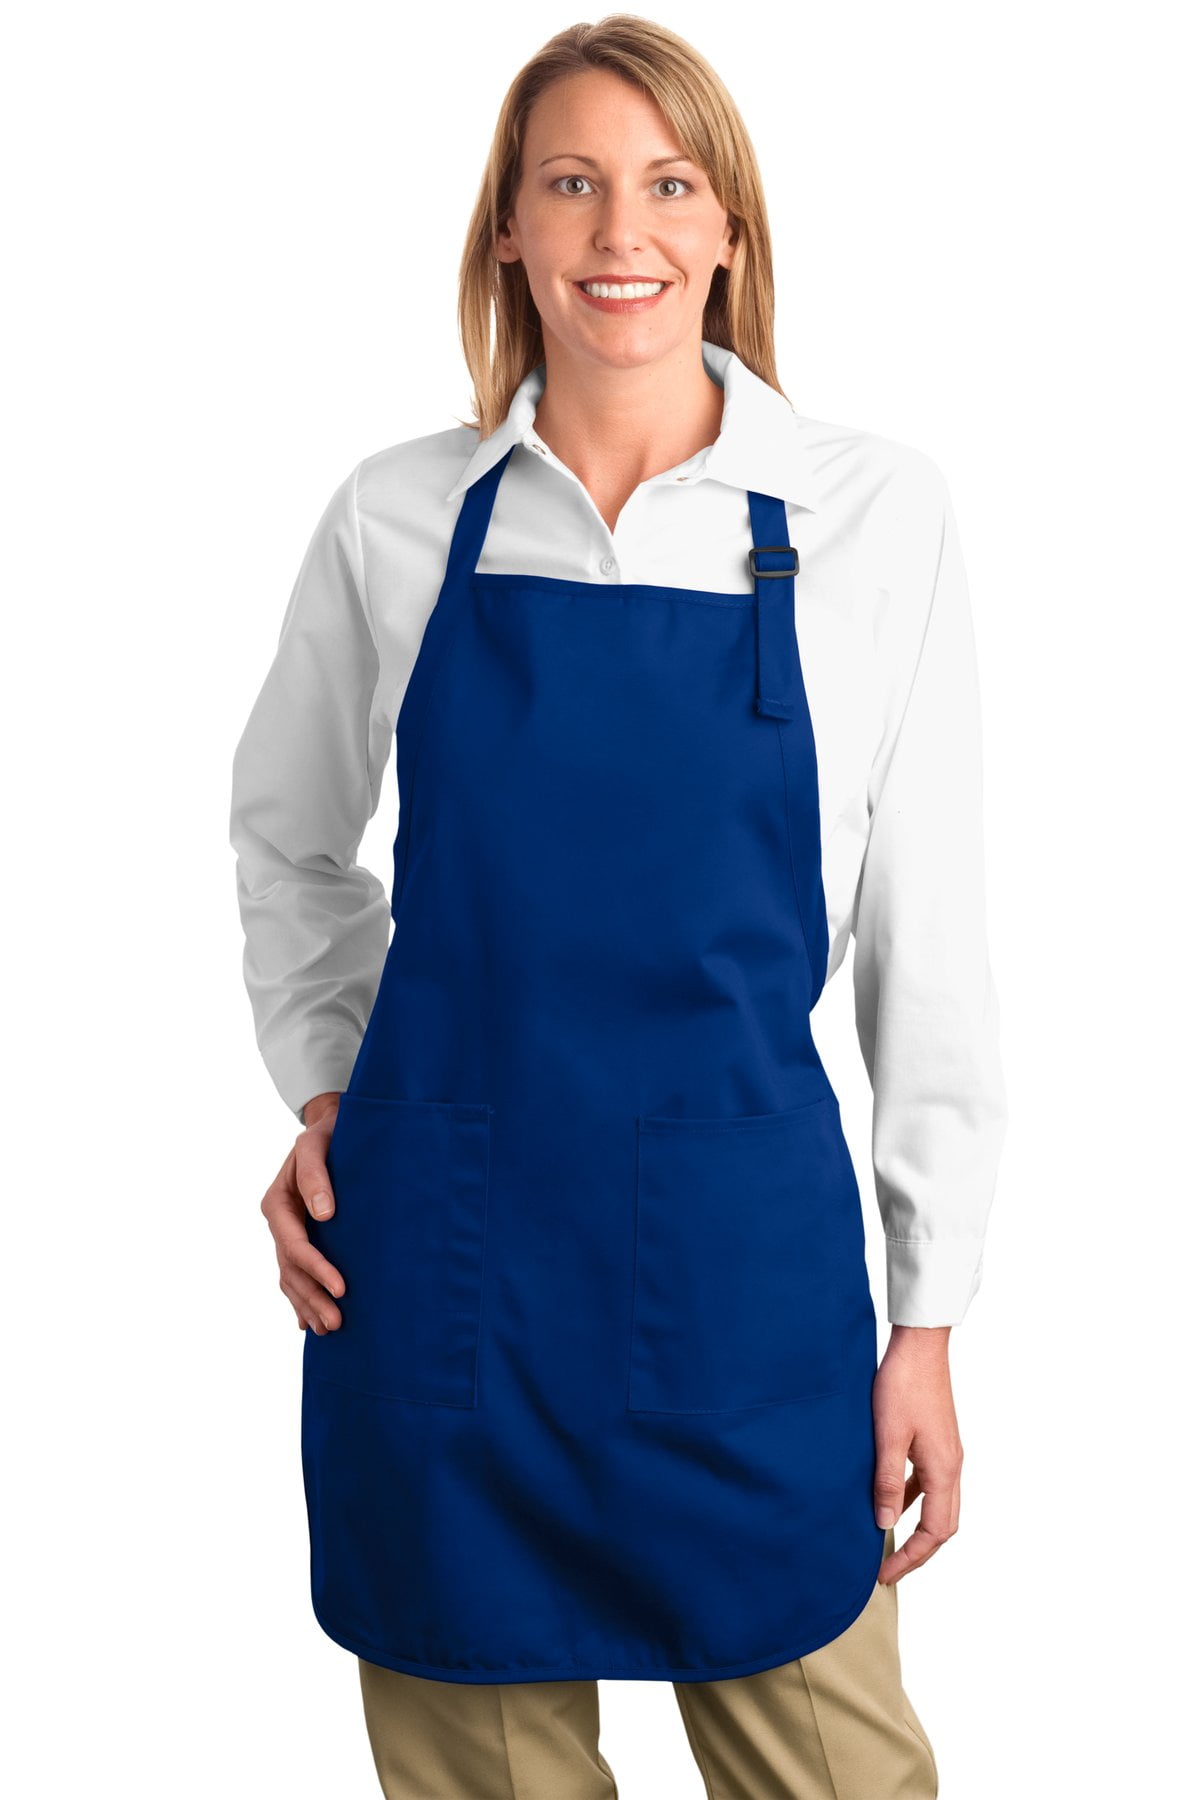 ADULT STAIN RELEASE ADJUSTABLE 1" WIDE STRAPS FULL LENGTH APRON TWO POCKETS